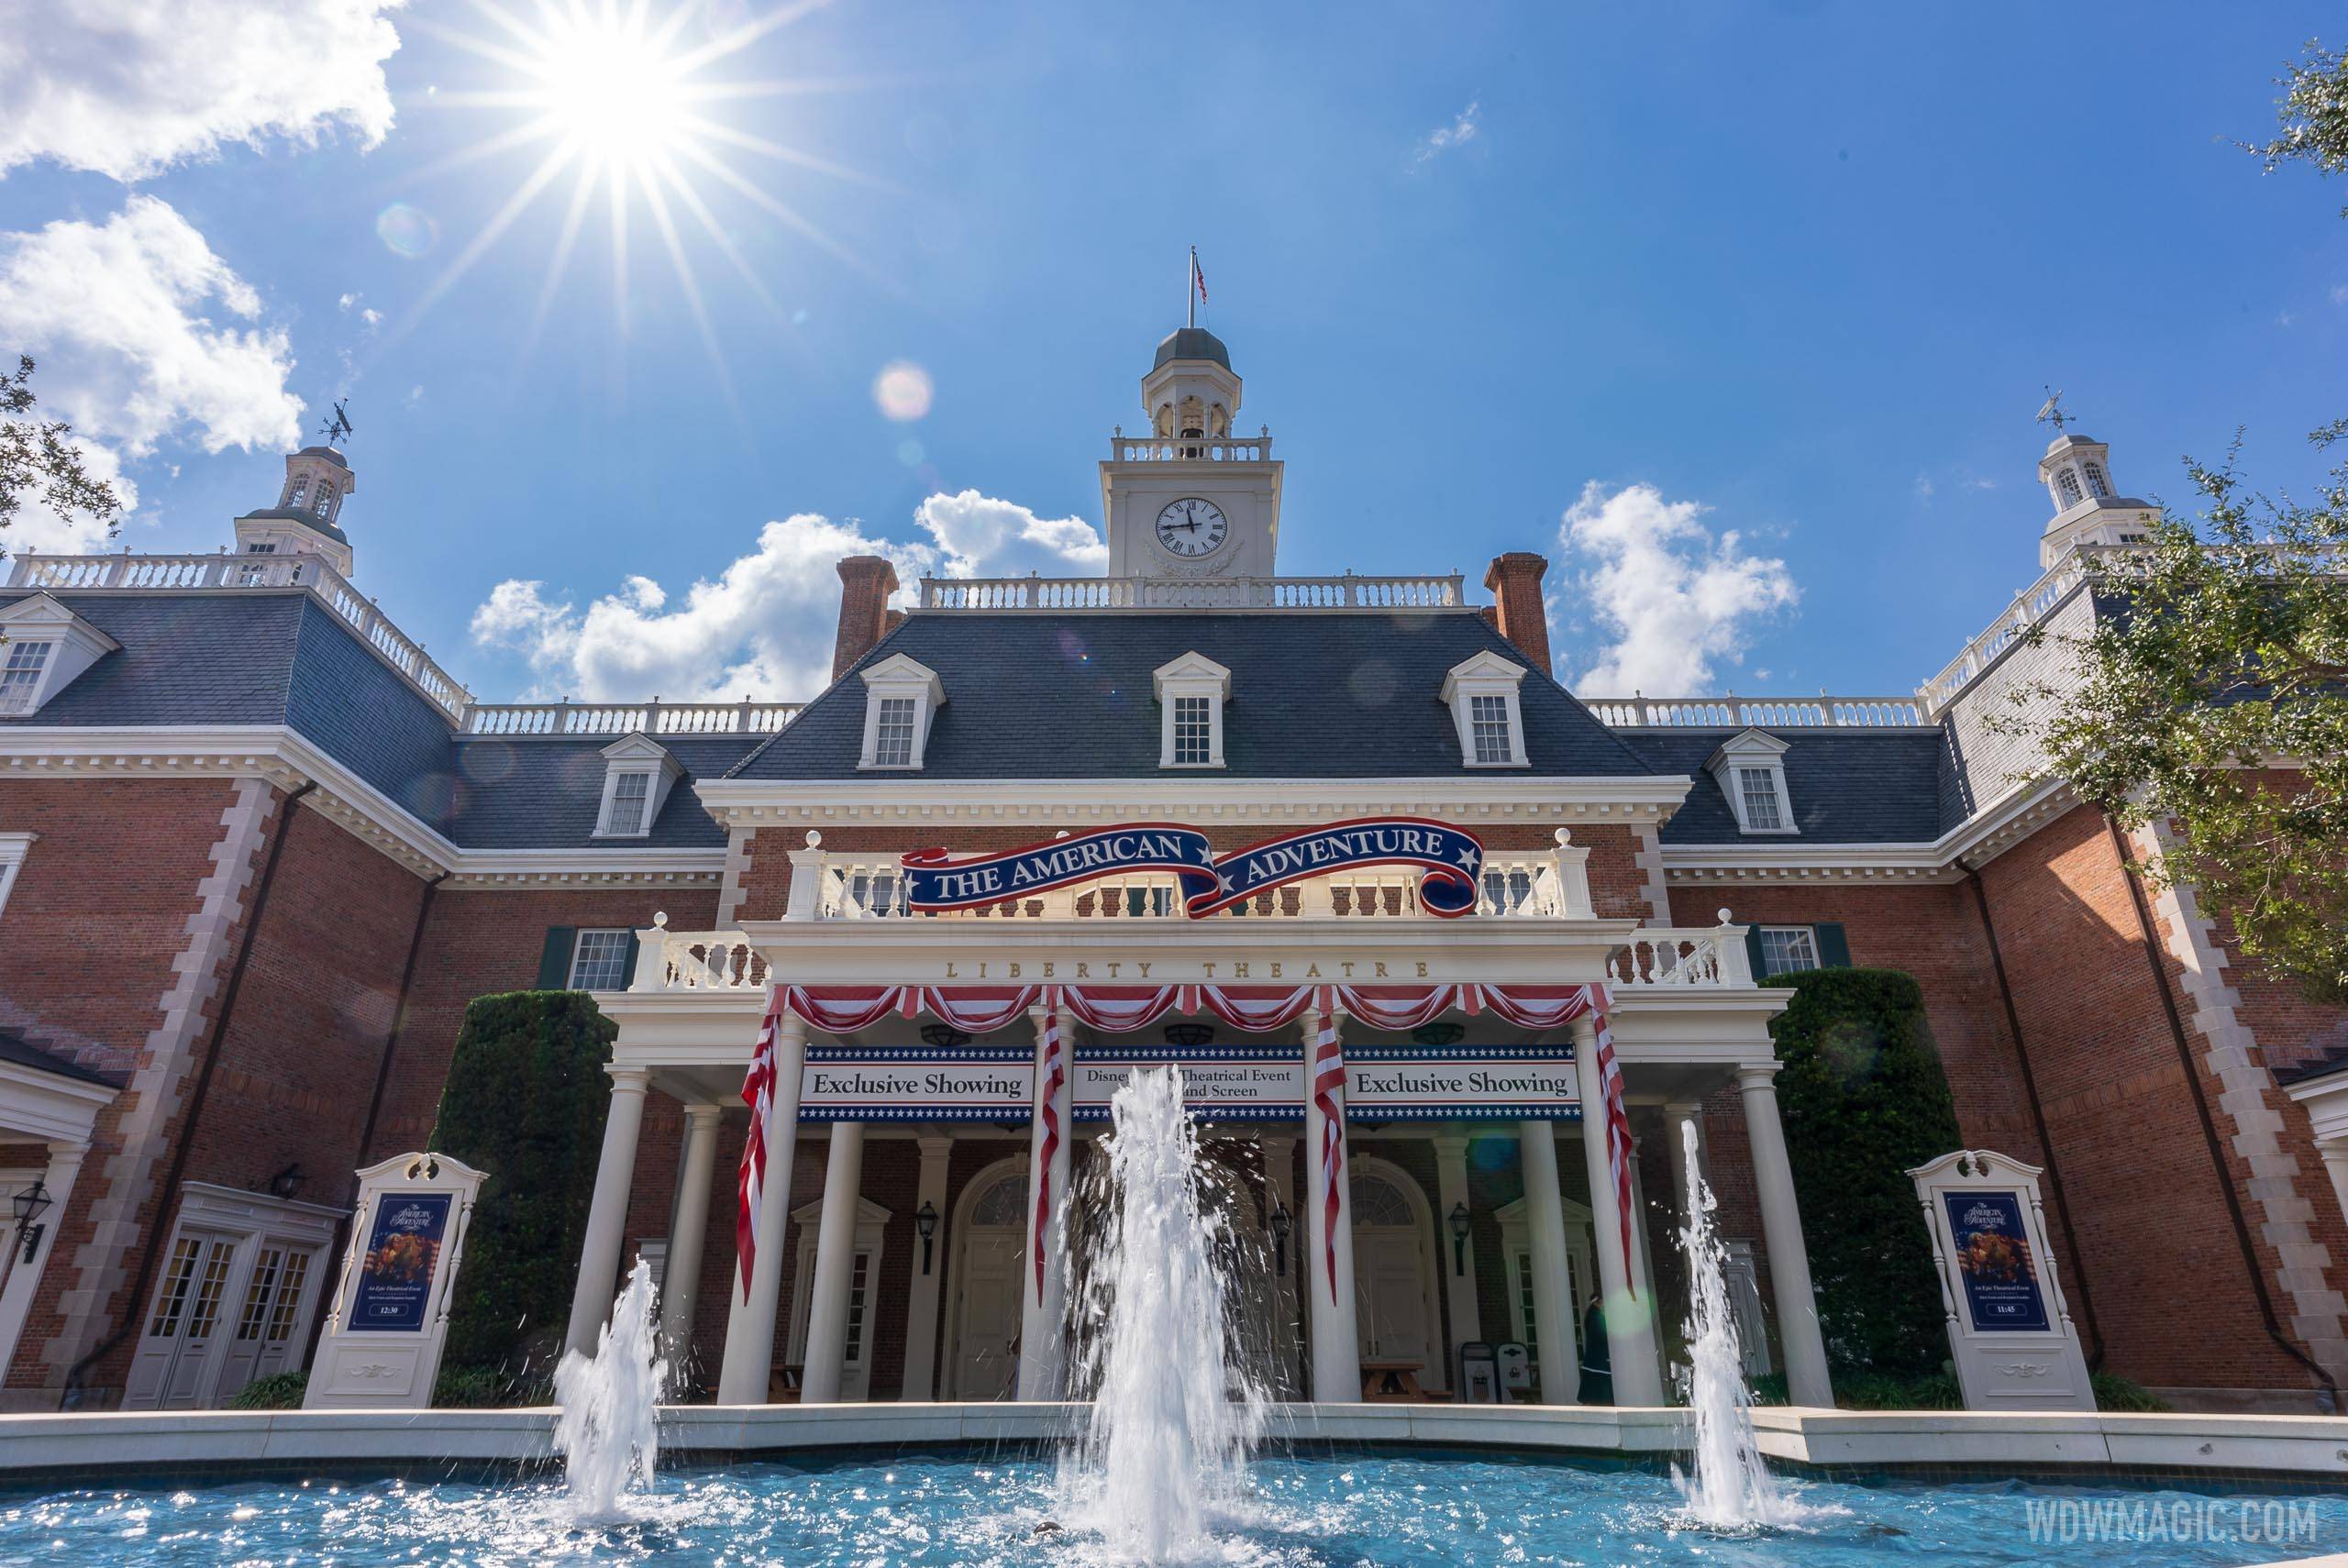 July 4 special entertainment offerings at The American Adventure pavilion at Epcot